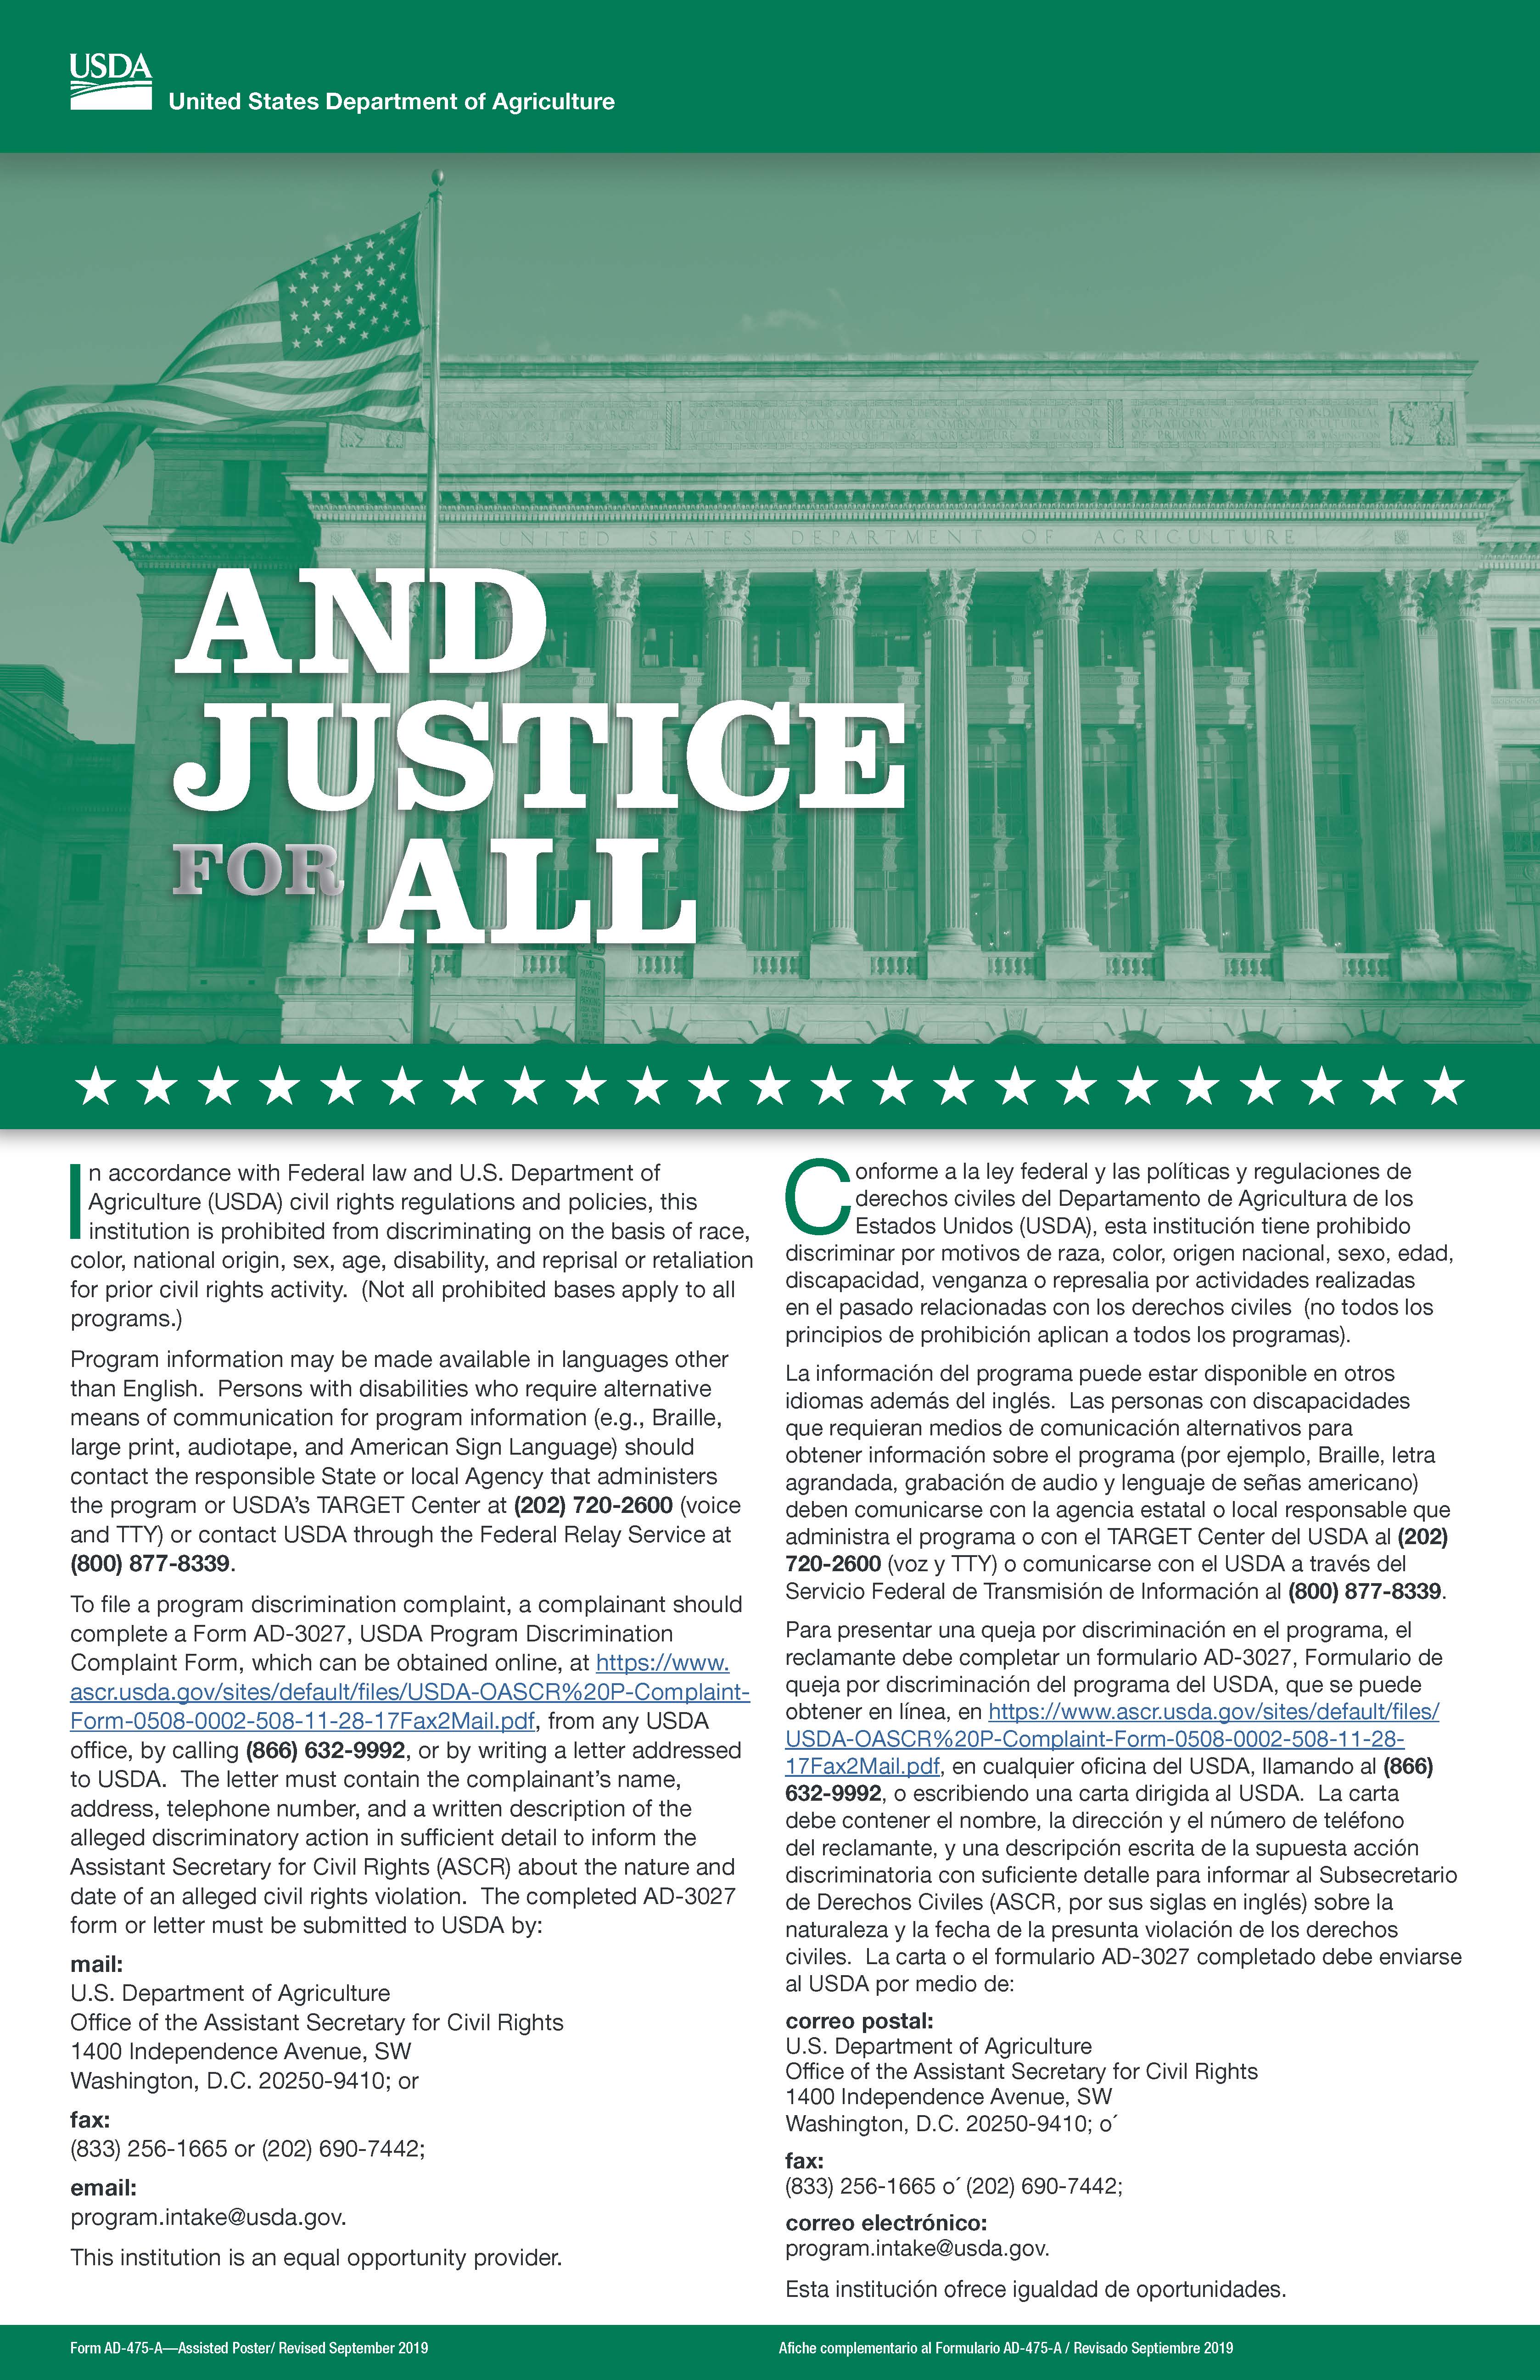 Justice for All Poster 